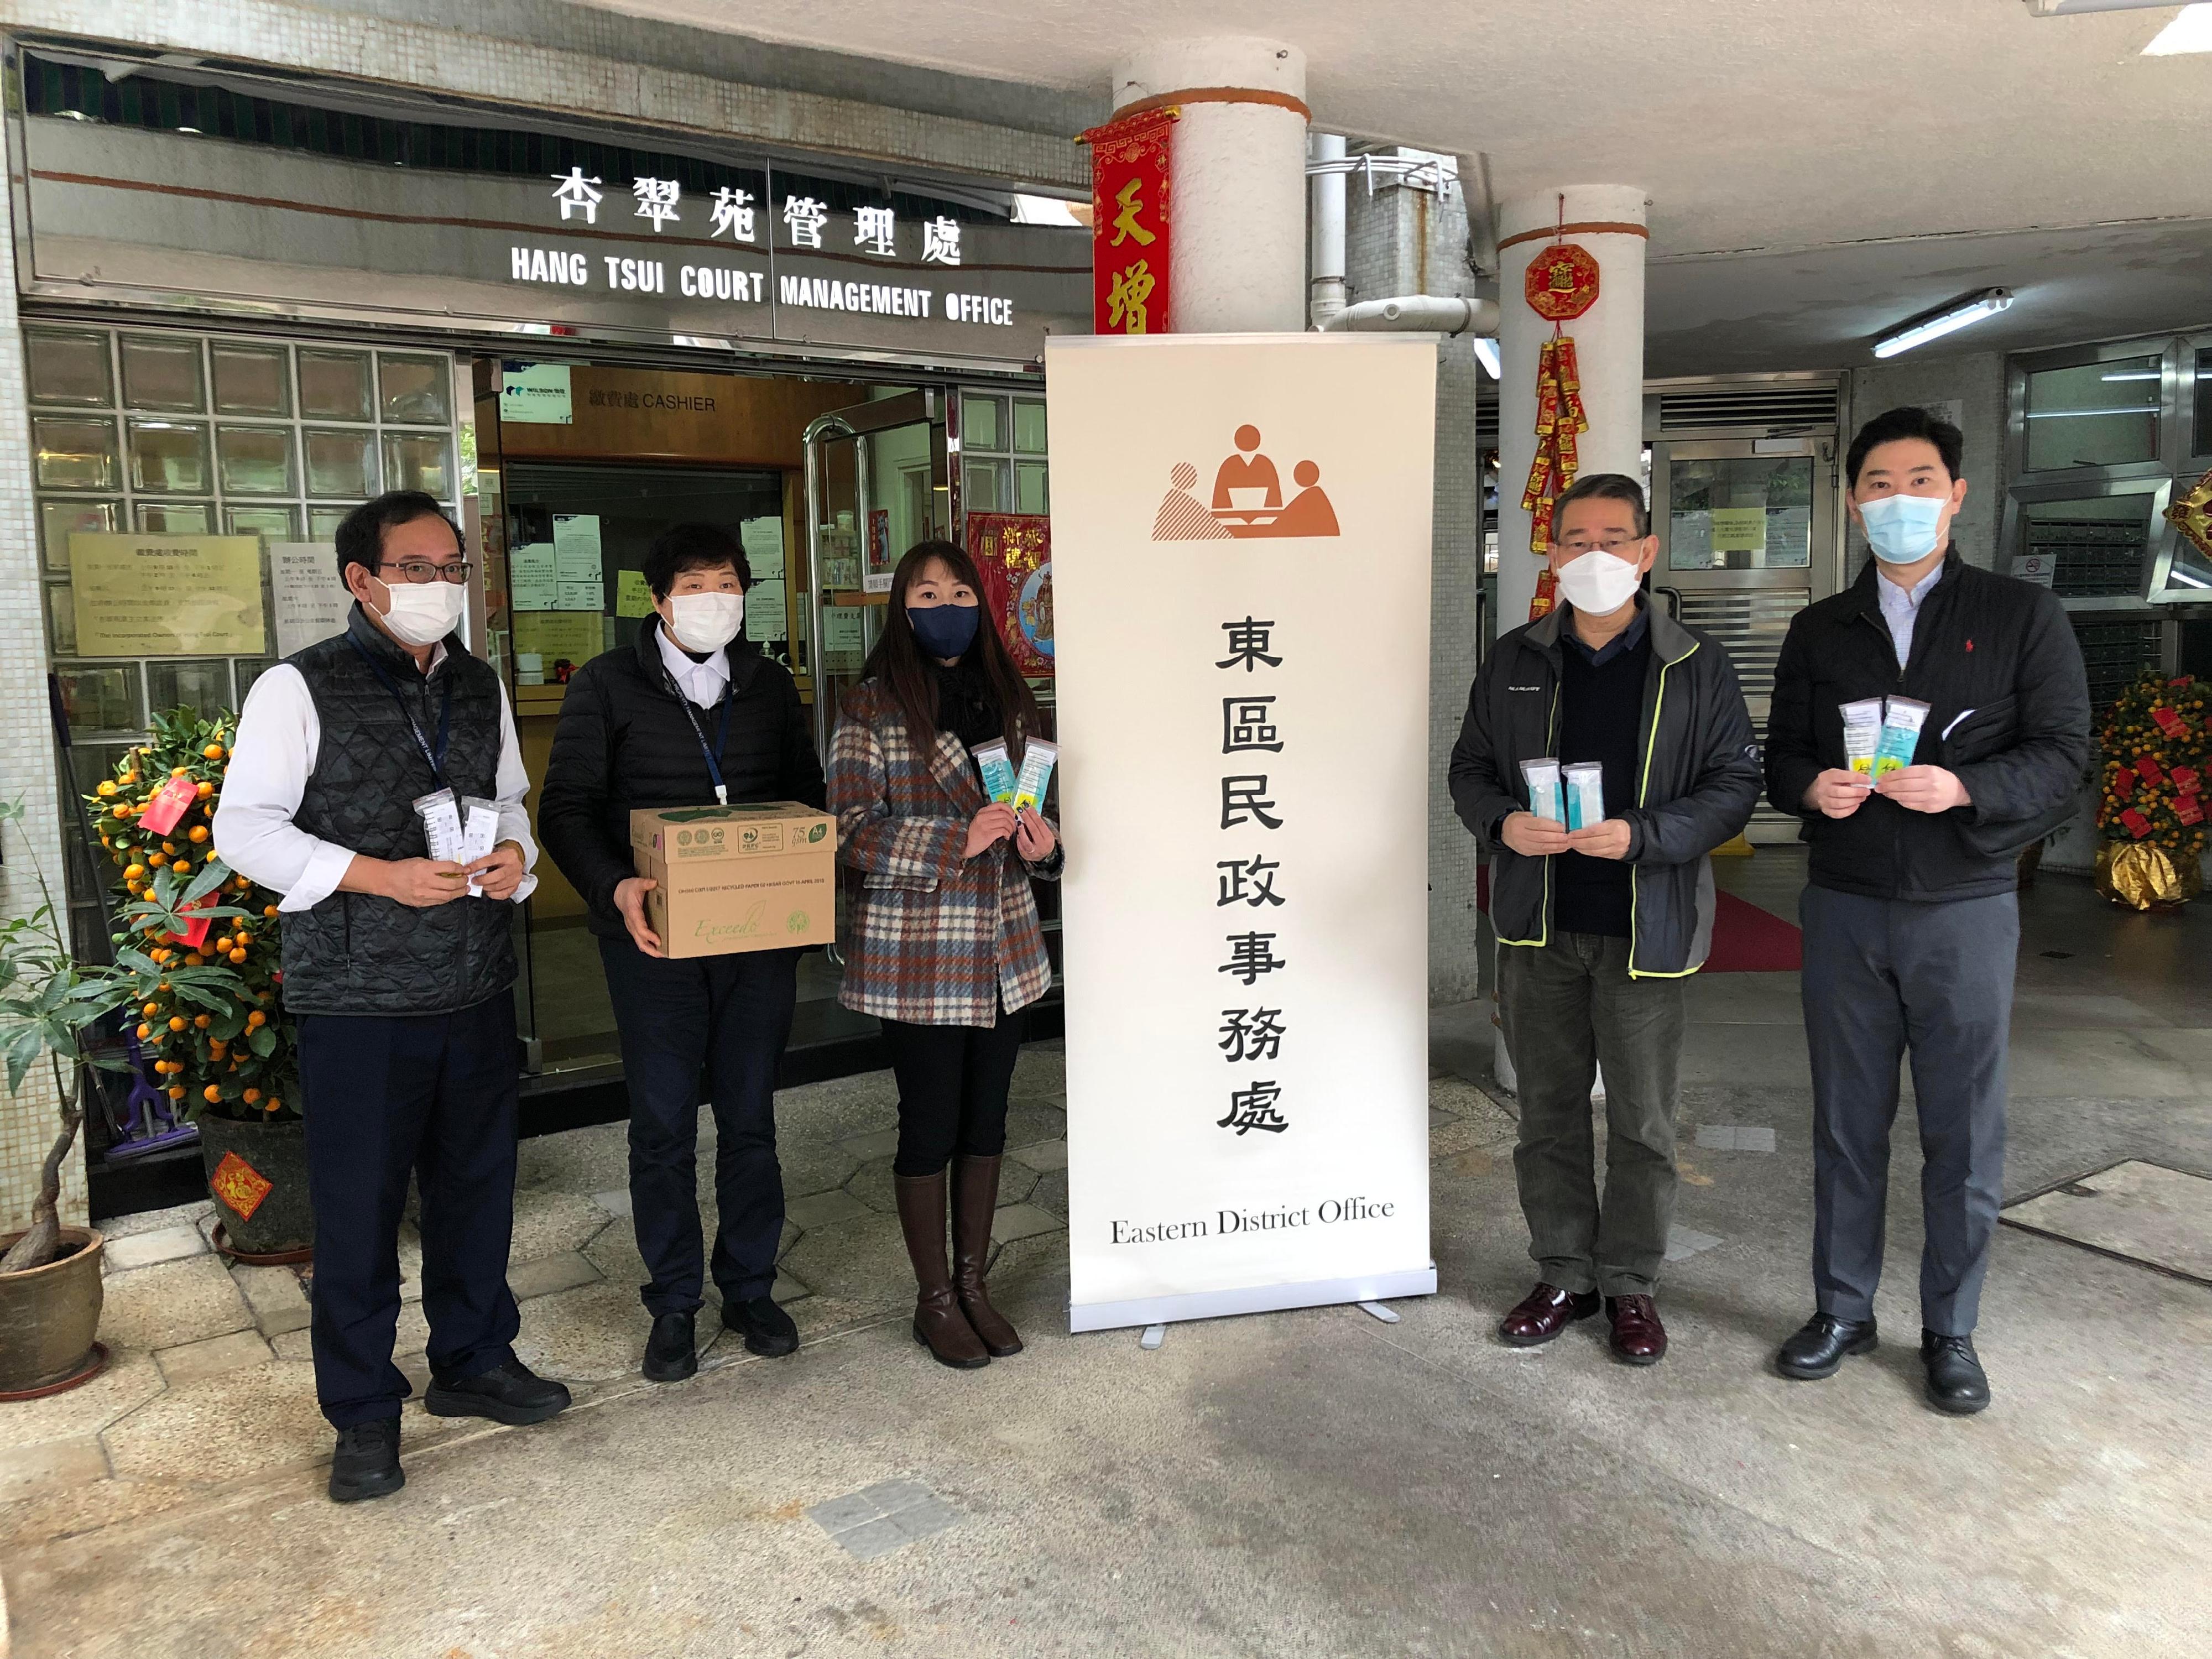 The Eastern District Office today (February 13) distributed rapid test kits to cleansing workers and property management staff working in Tsui Wan Estate, Tsui Lok Estate, Hang Tsui Court, Koway Court and Bayview Park for voluntary testing through the property management companies.